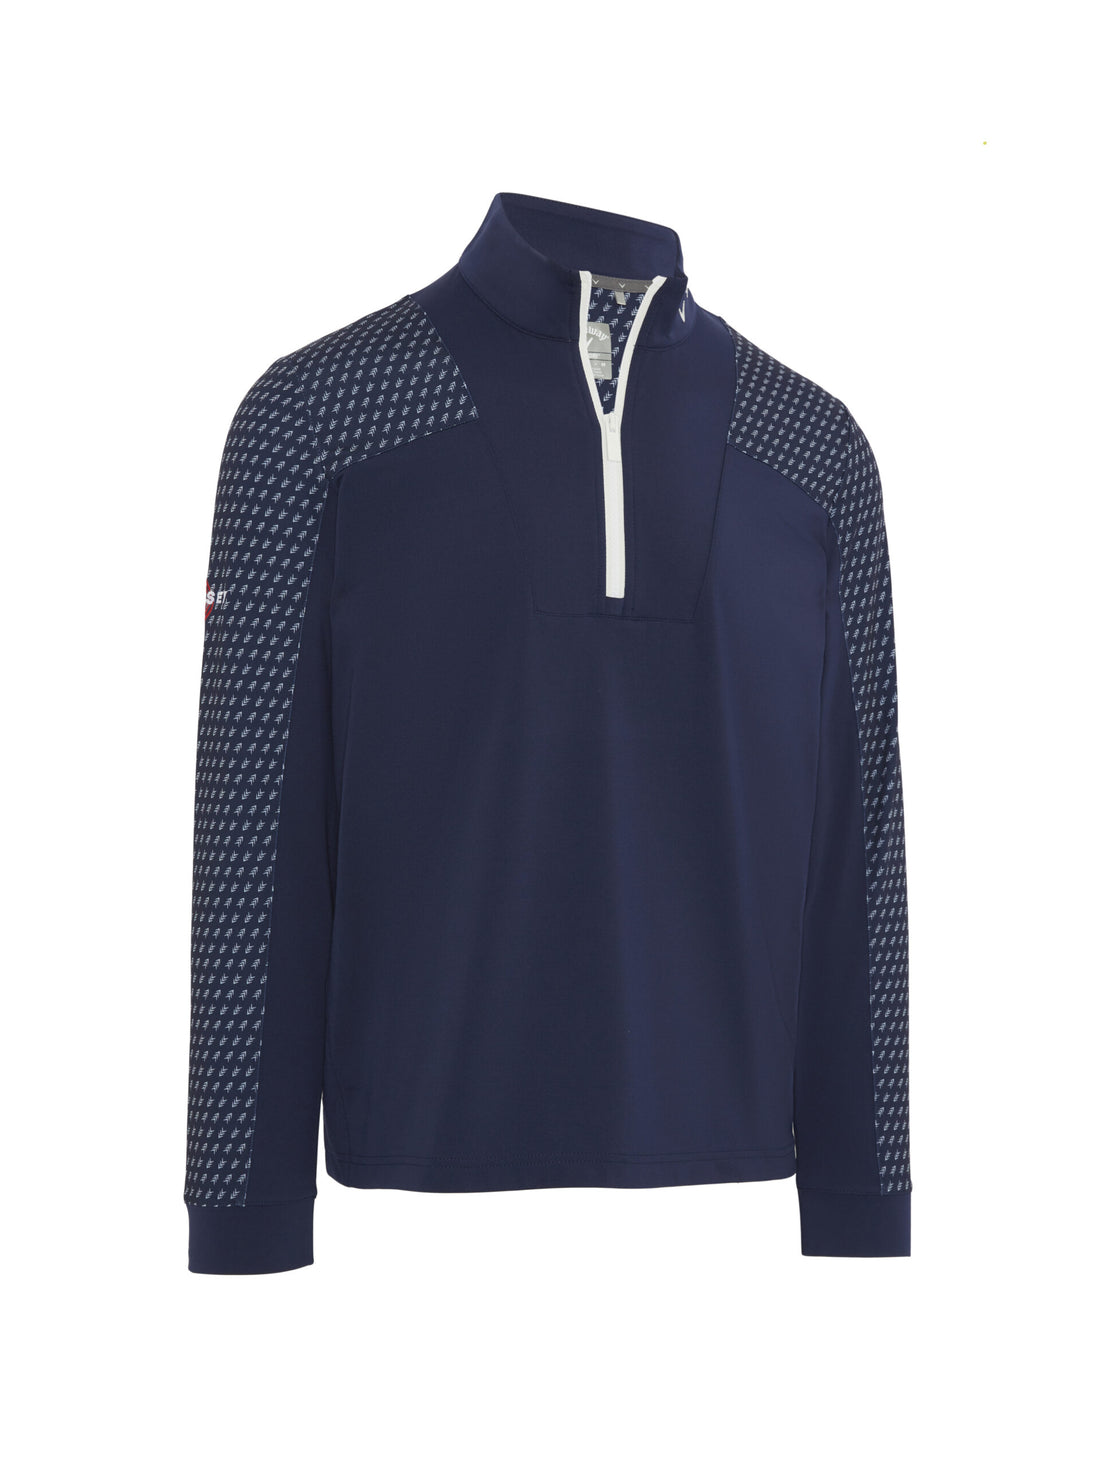 Callaway Chev Motion Print Pullover